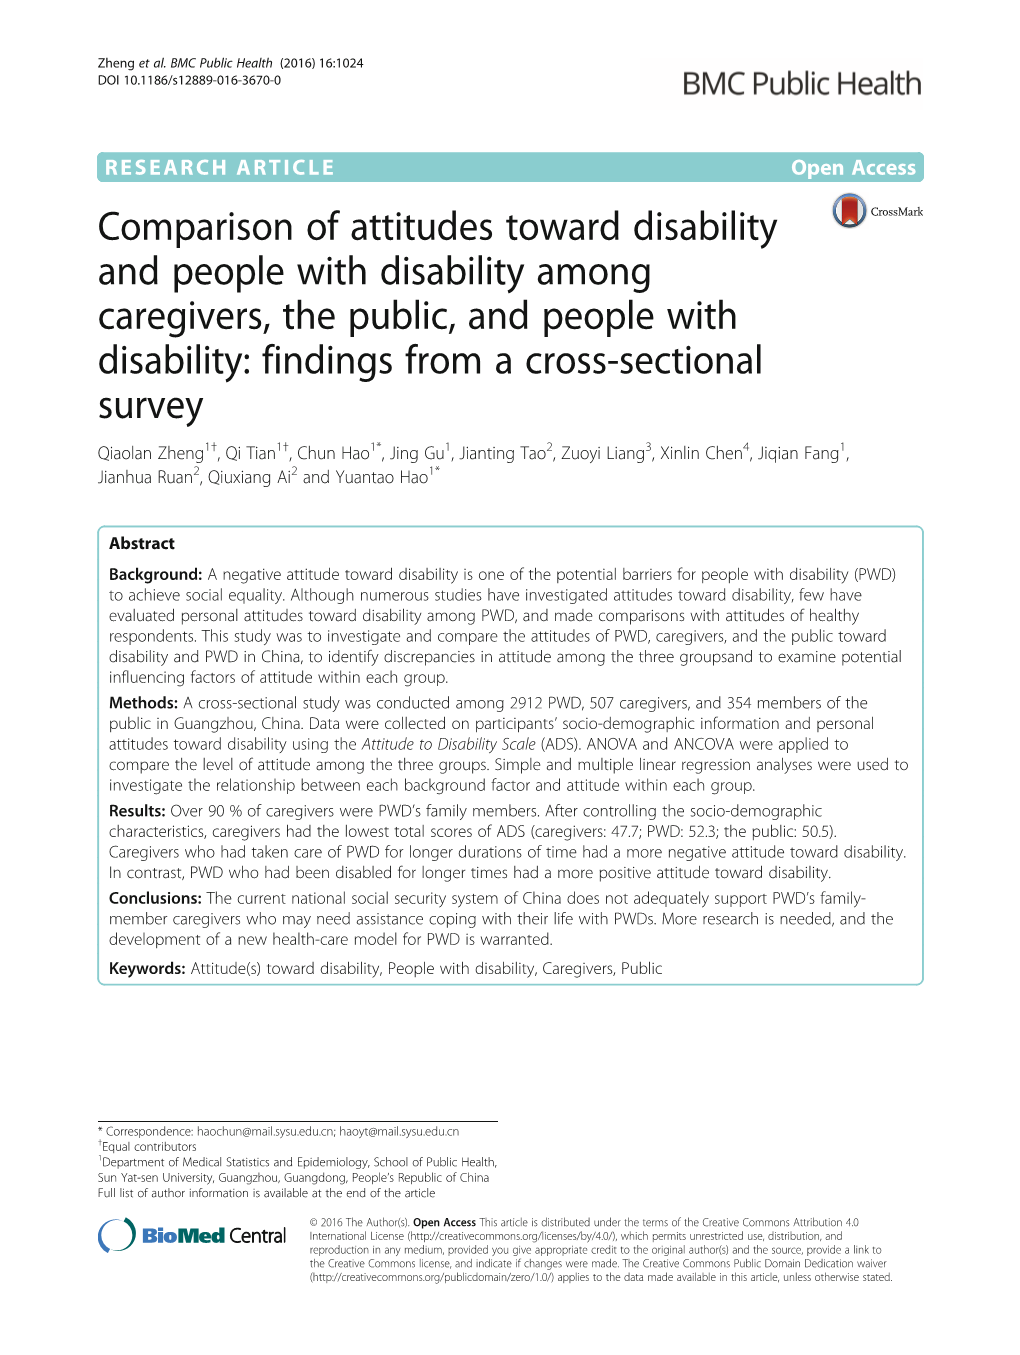 Comparison of Attitudes Toward Disability and People with Disability